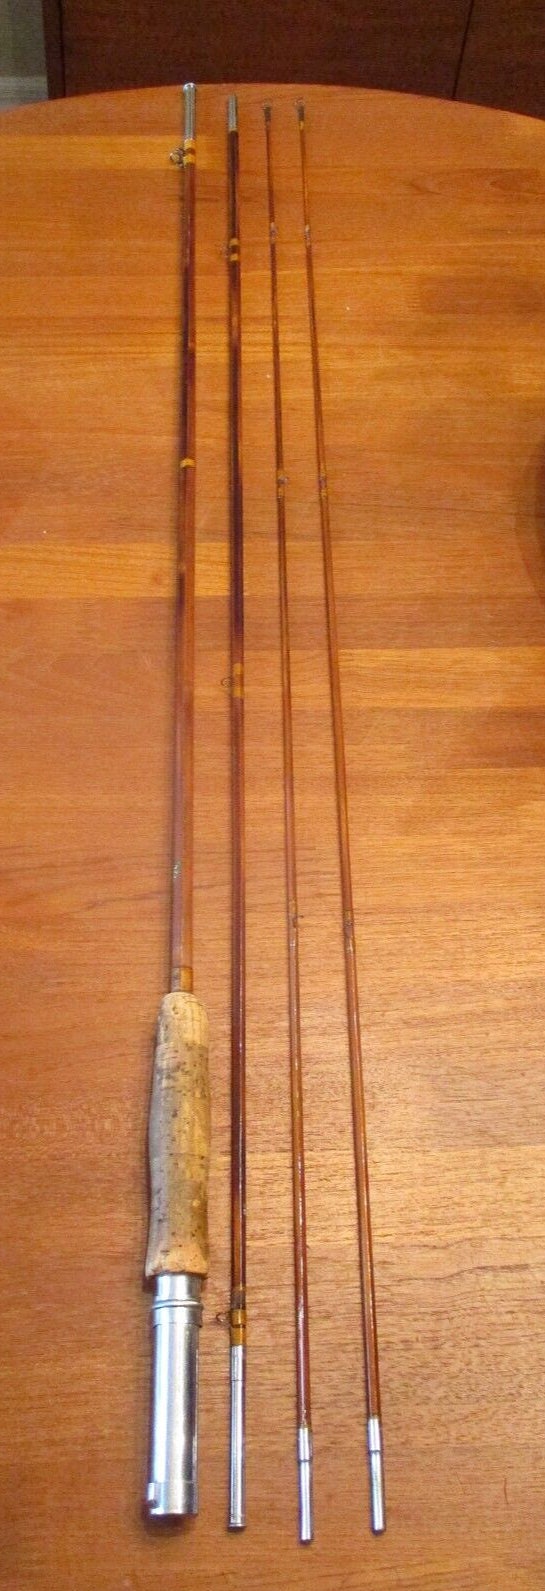 1936~1940 South Bend Best -O-Luck 4 pc Split BAMBOO FISHING ROD with  Original Storage Case Museum Quality Rarely Seen in this condition